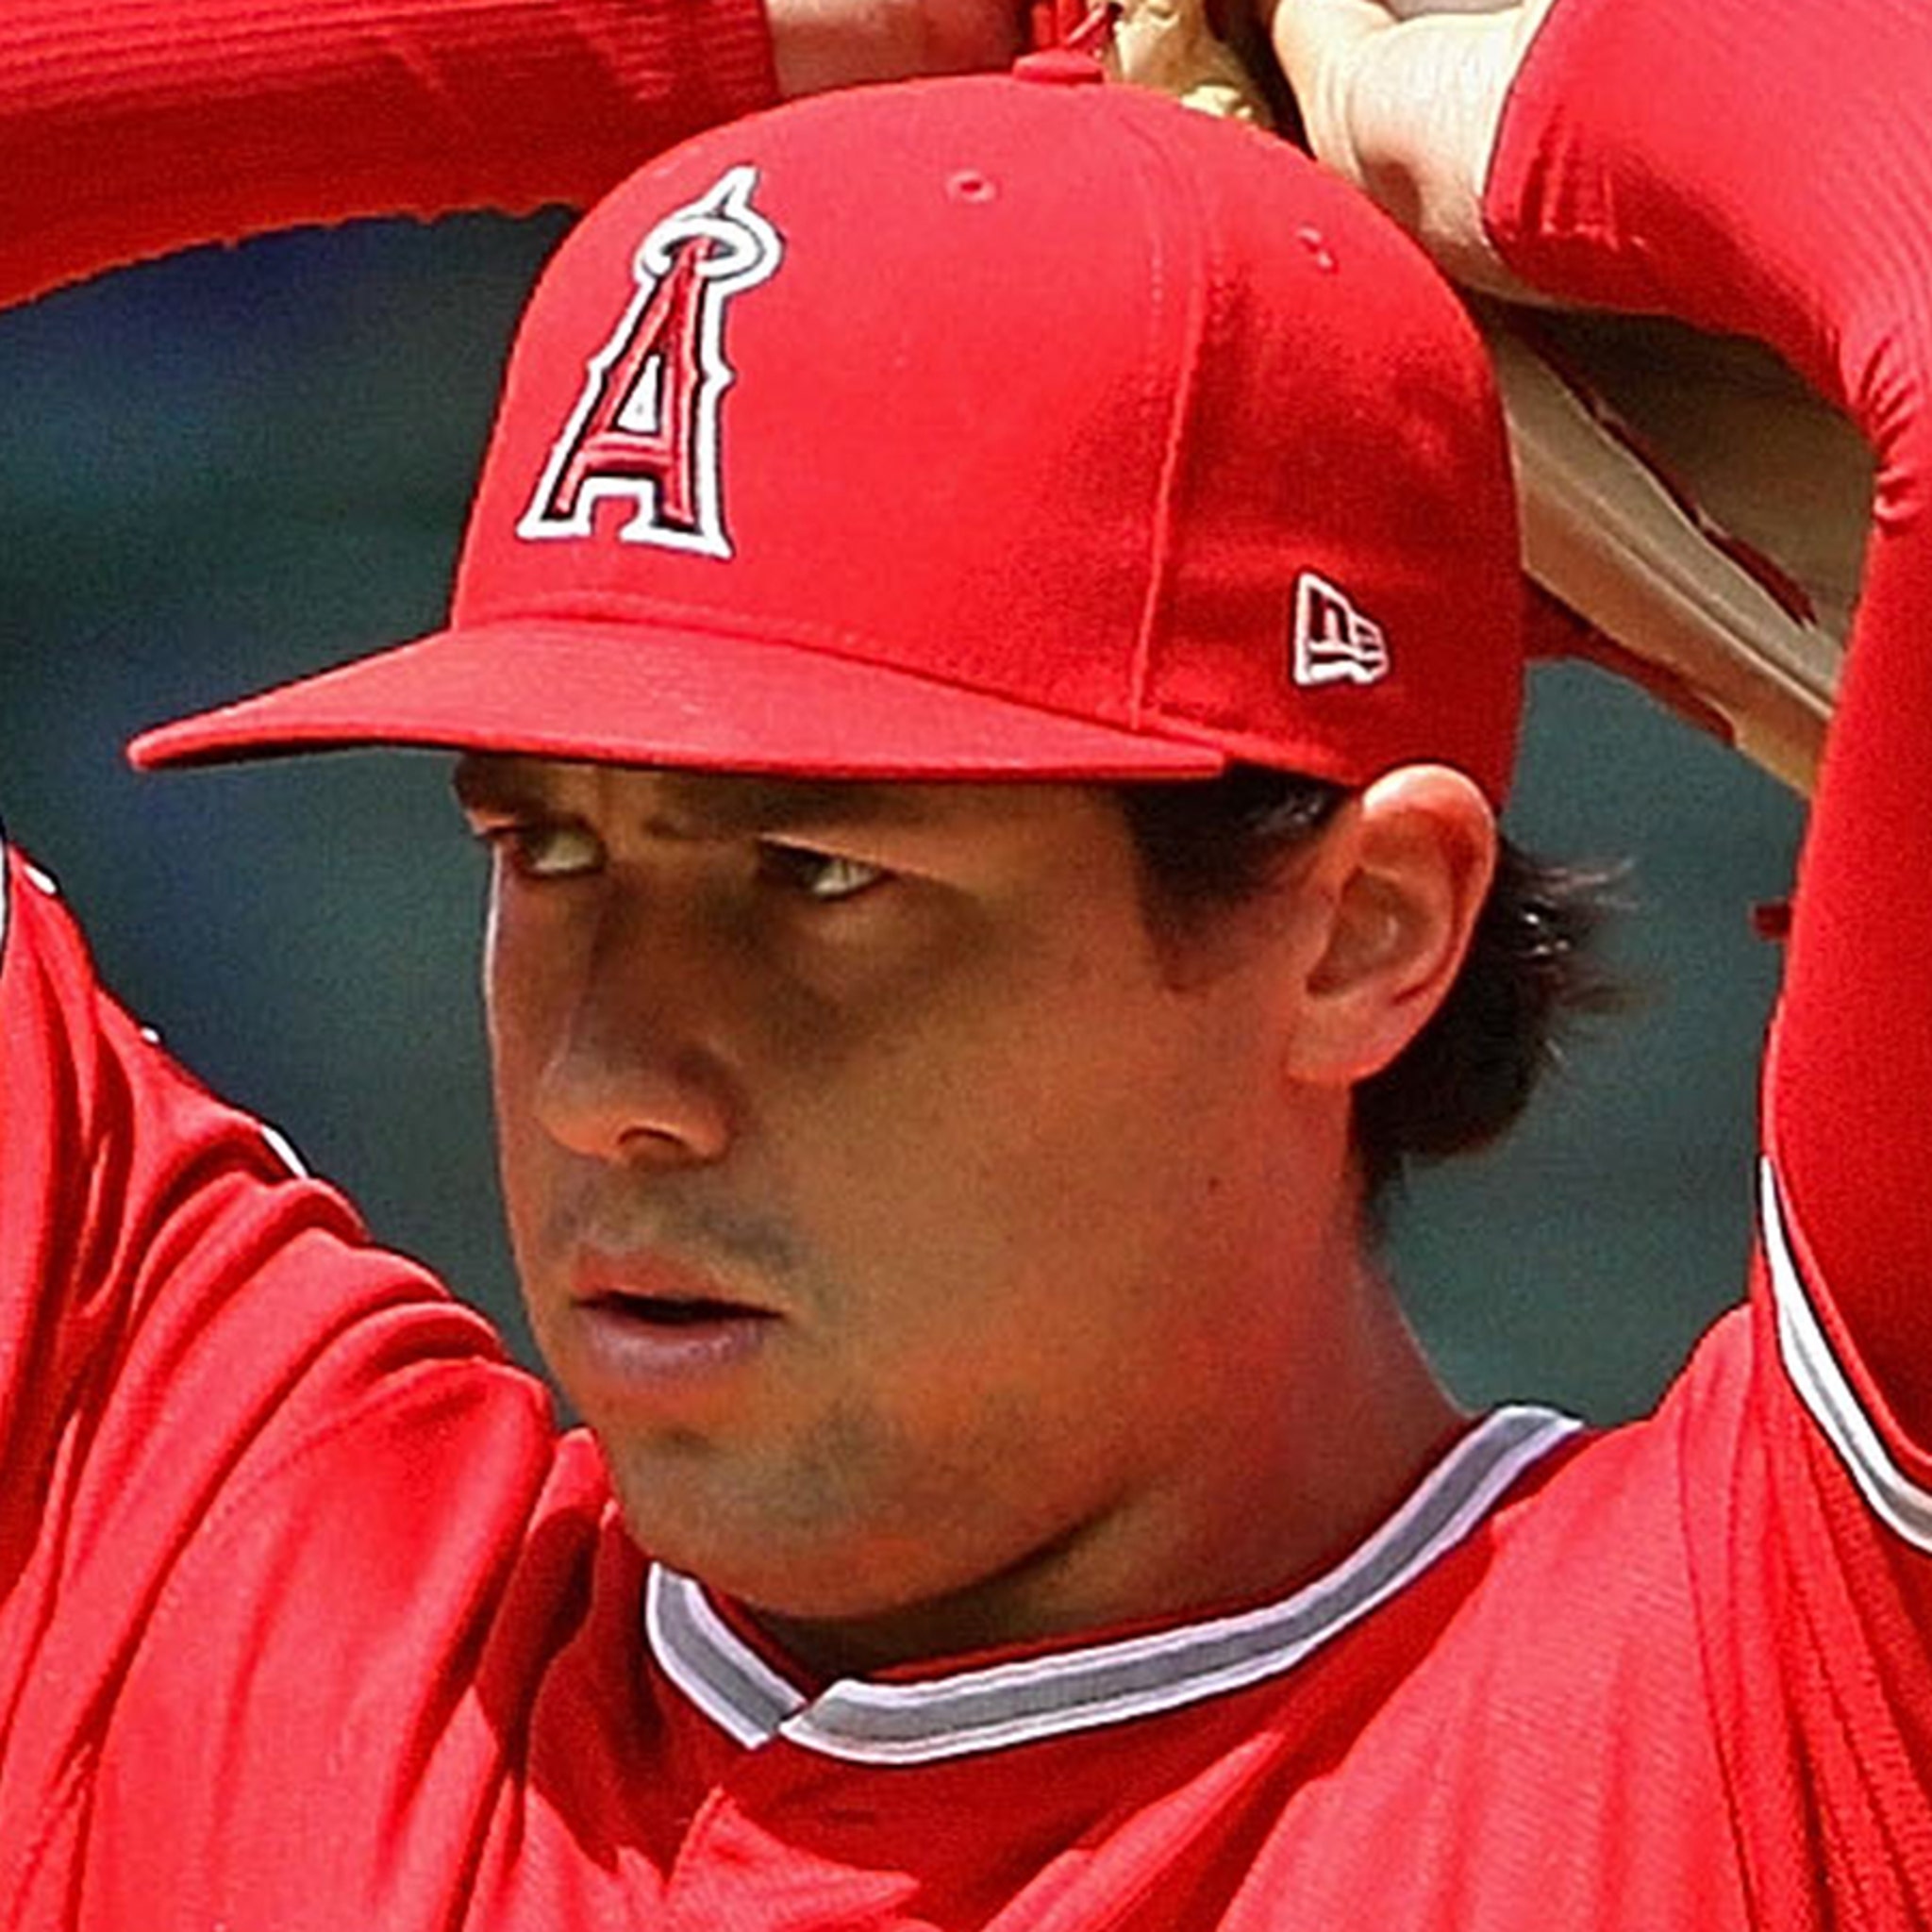 Tyler Skaggs Allegedly Supplied with Drugs By Angels Employee